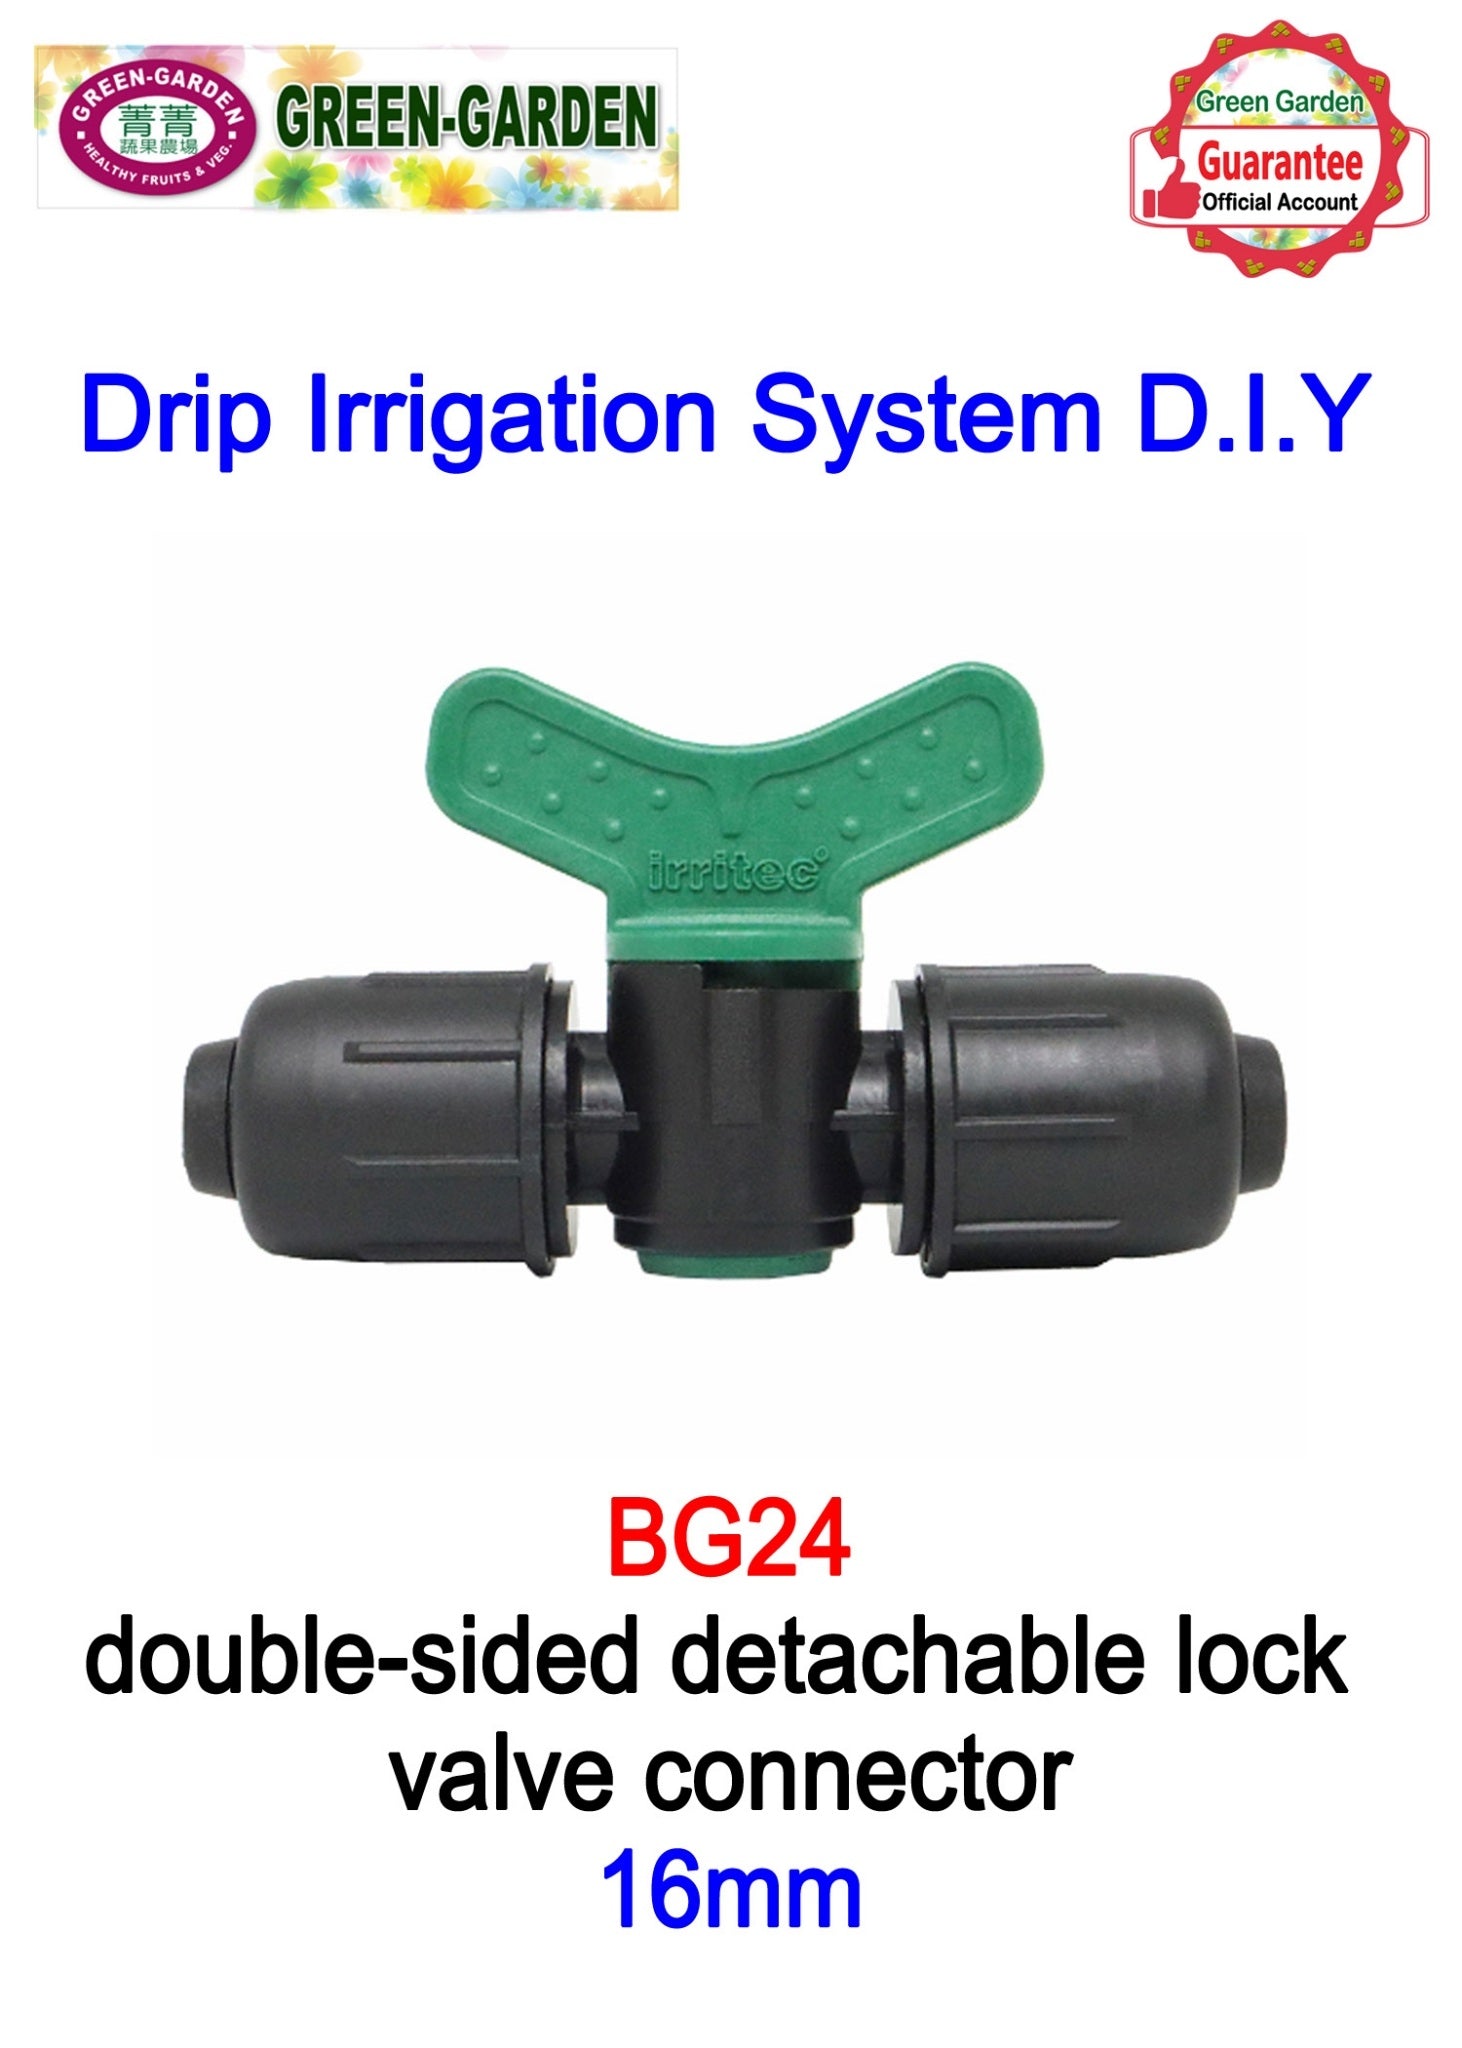 Drip Irrigation System - 16mm double-sided detachable lock valve connector BG24